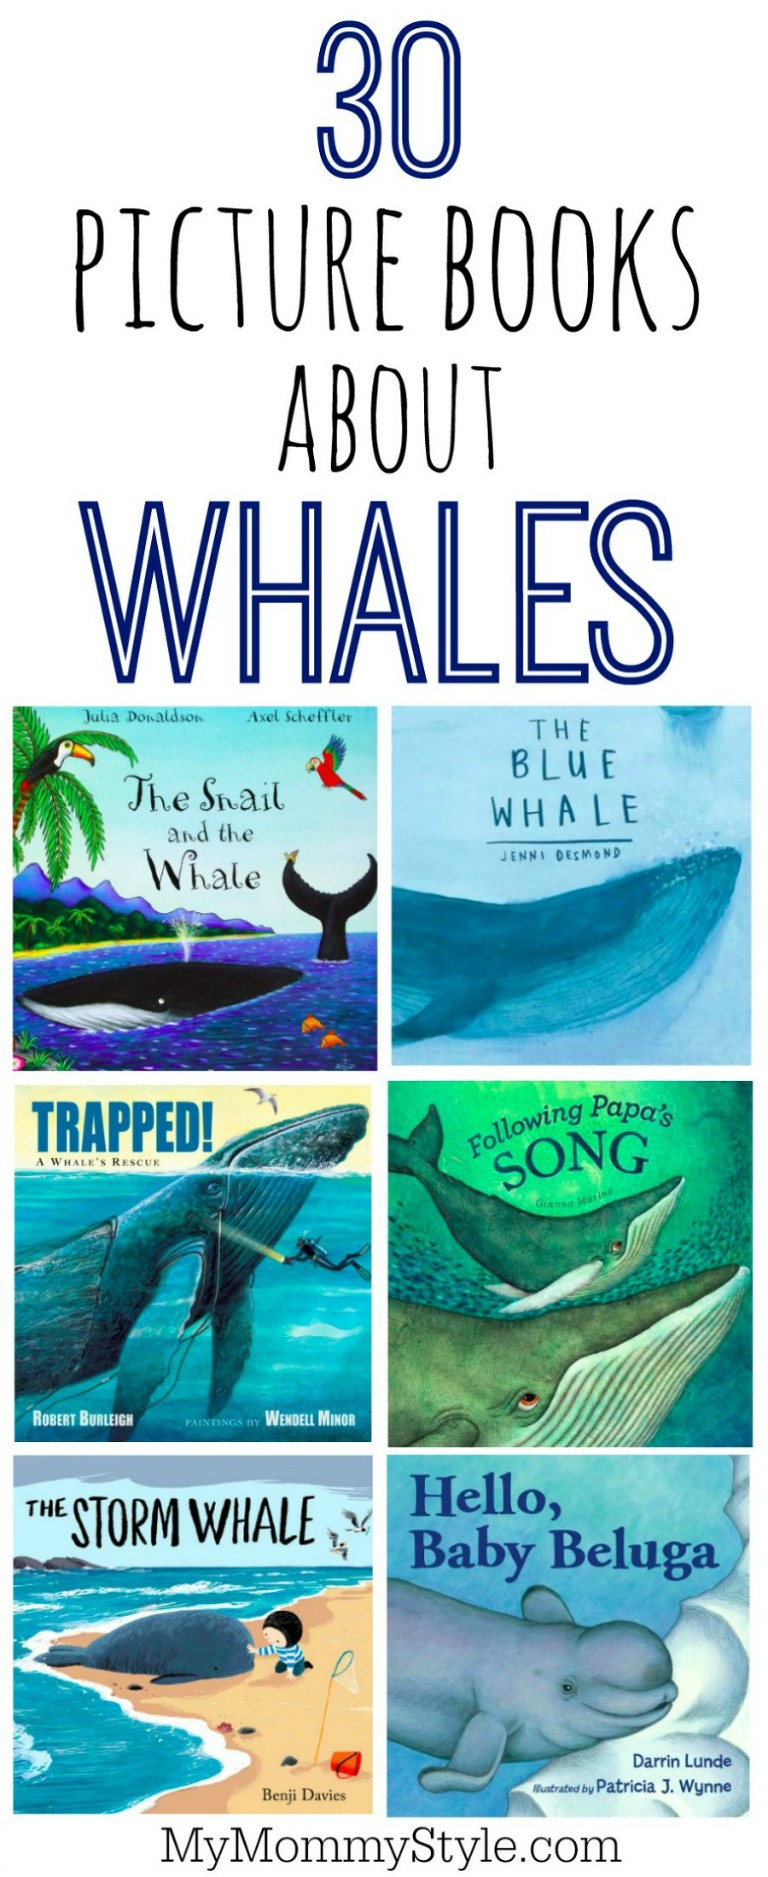 picture books about whales for preschoolers and young kids. Perfect books to read for under the sea theme at school.